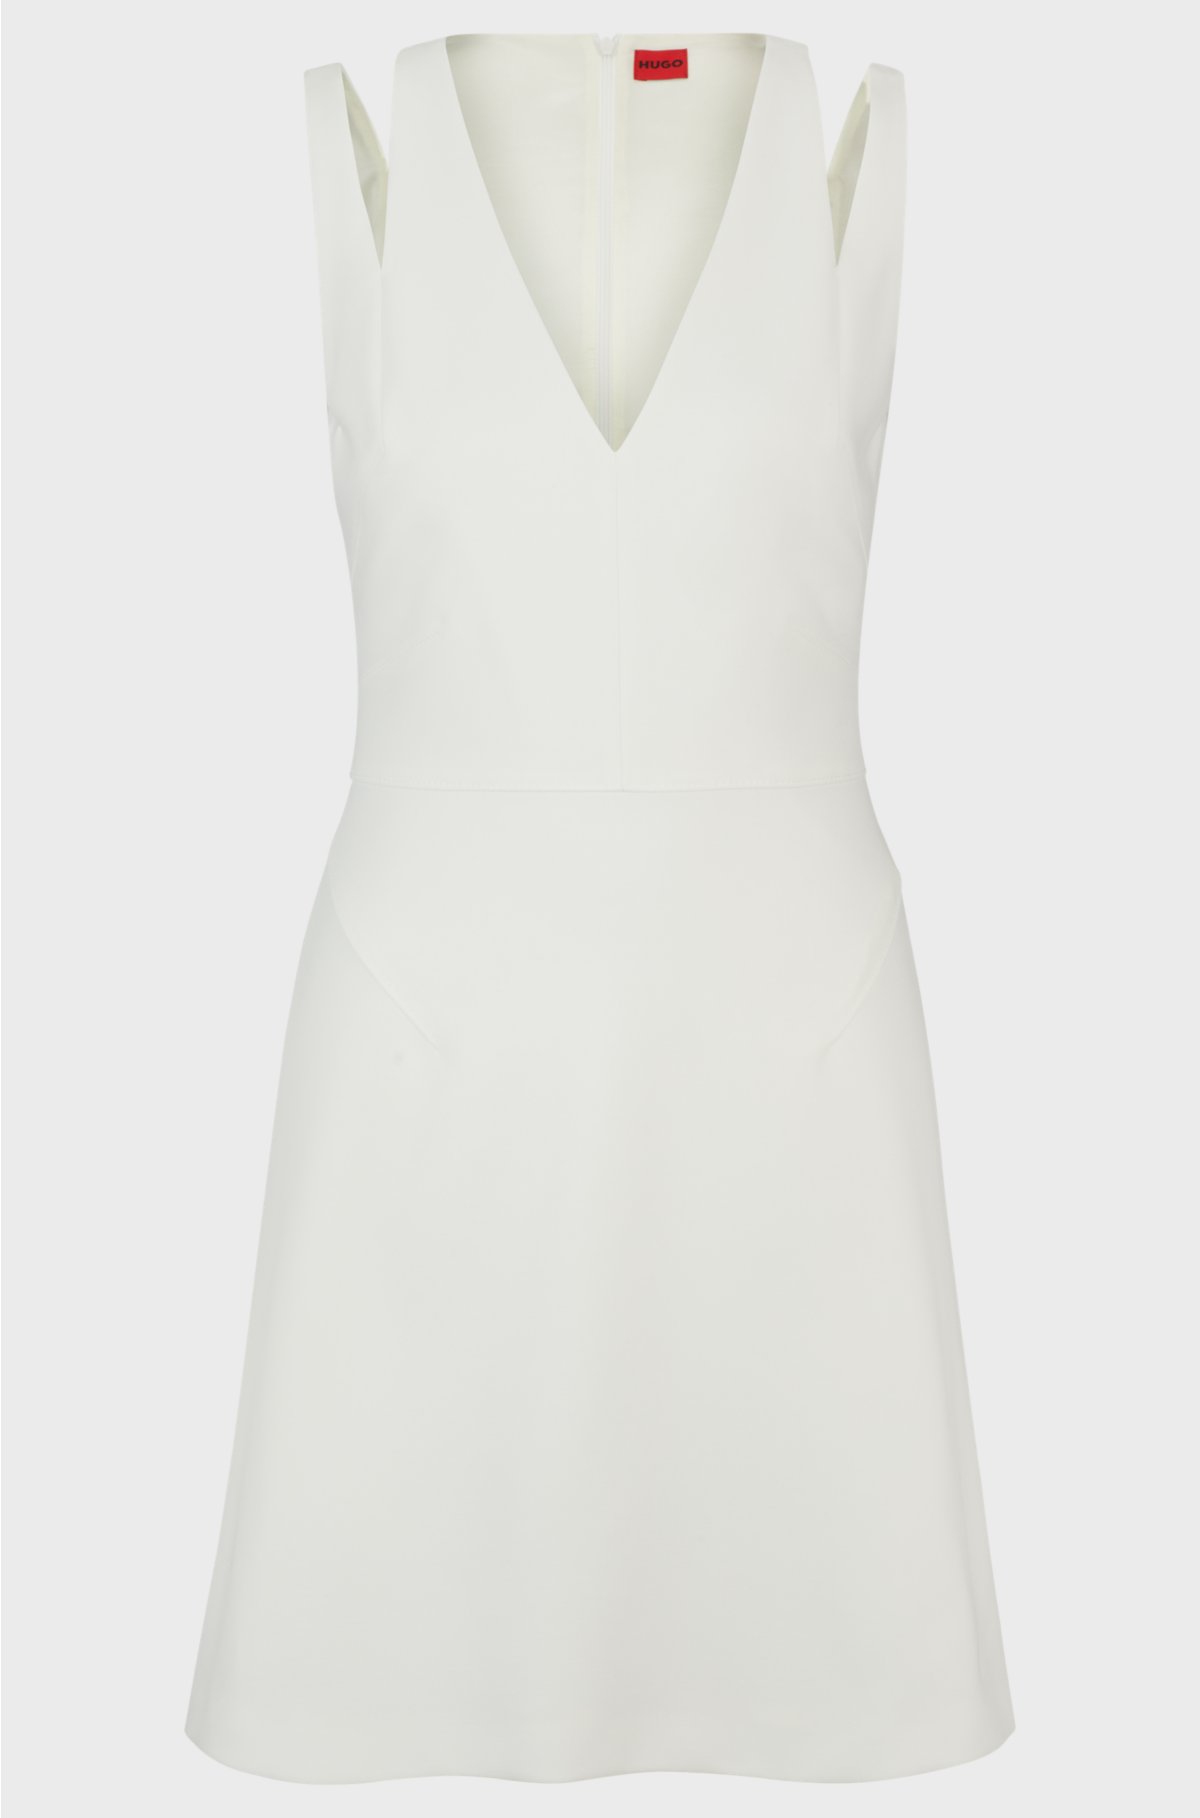 V-neck sleeveless dress with cut-out details, White